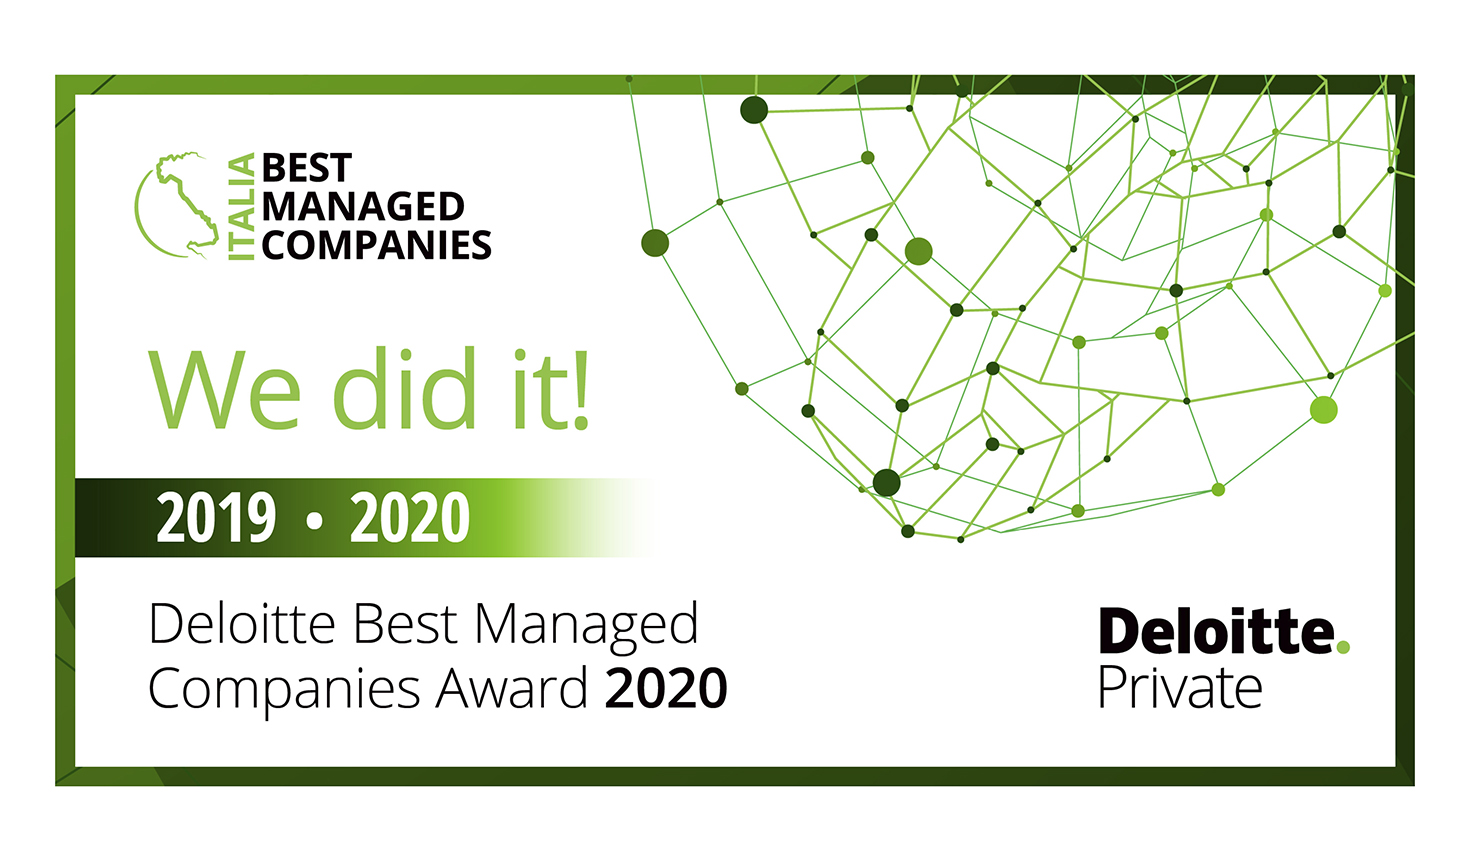 Giorgetti wins the ”Best Managed Companies” award also in 2020 1